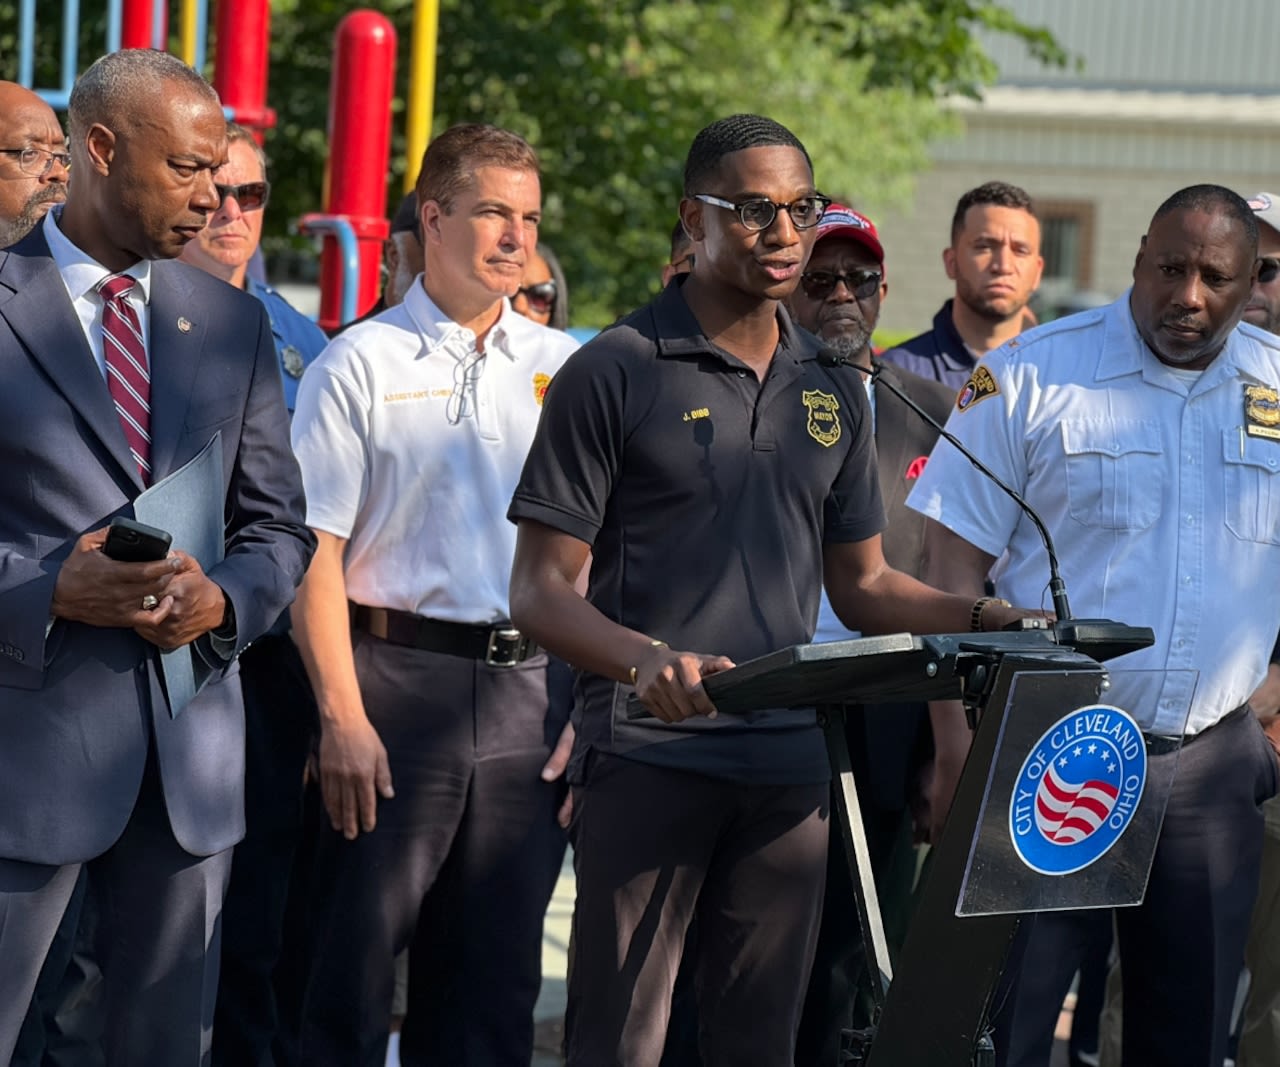 Cleveland’s top safety officials release summer initiatives to continue downward trends in crime